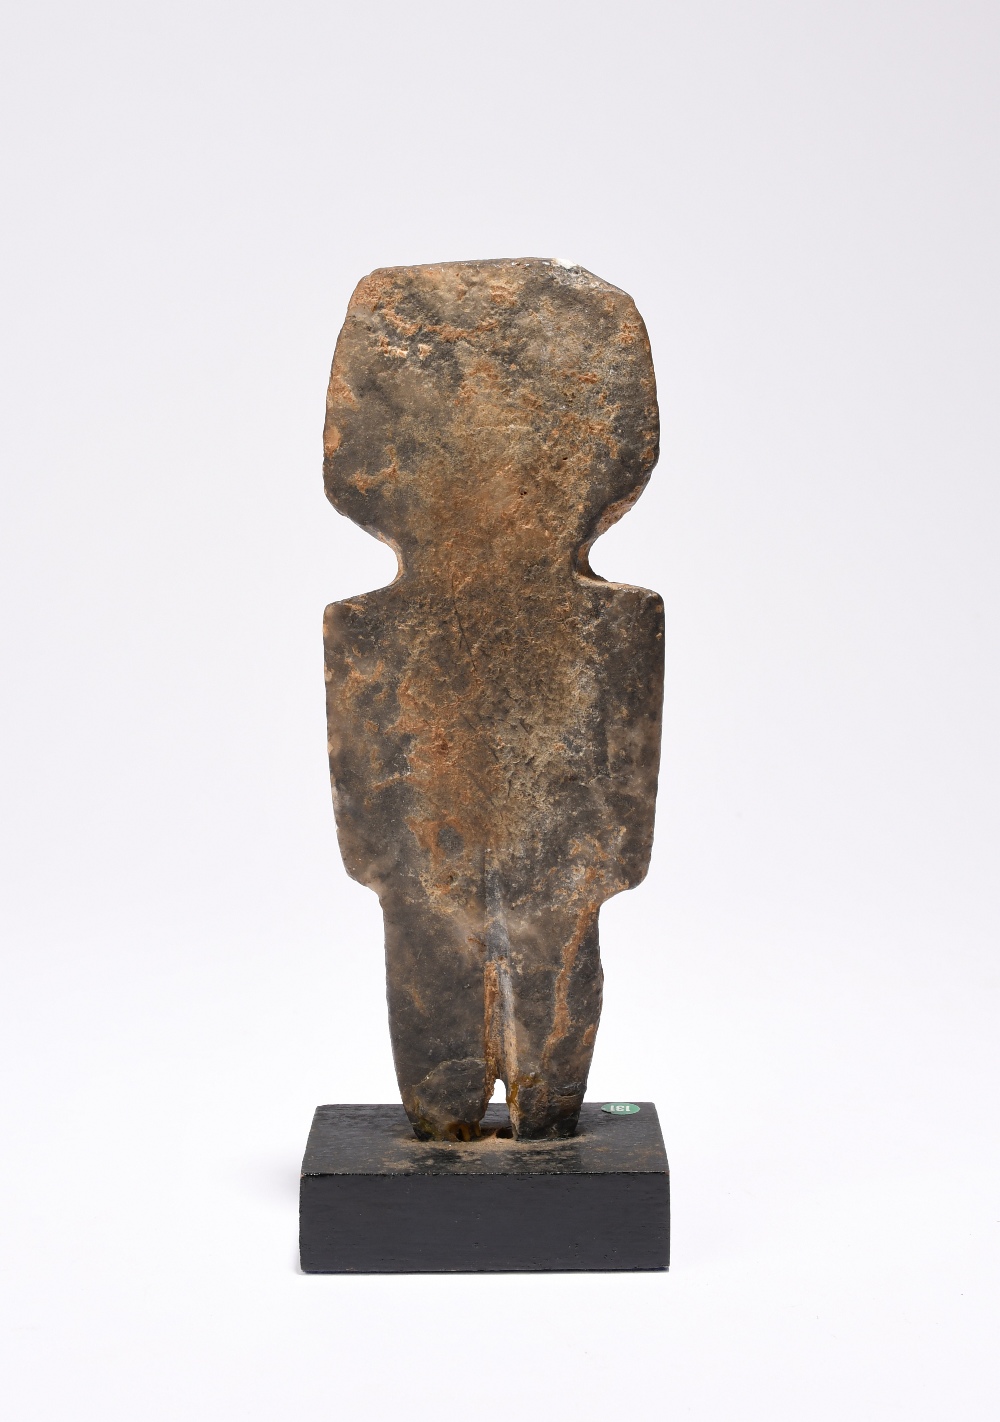 A Mezcala standing figure Guerrero, Mexico diorite, circa 300BC - 100AD, 17.2cm, mounted in a wood - Image 2 of 2